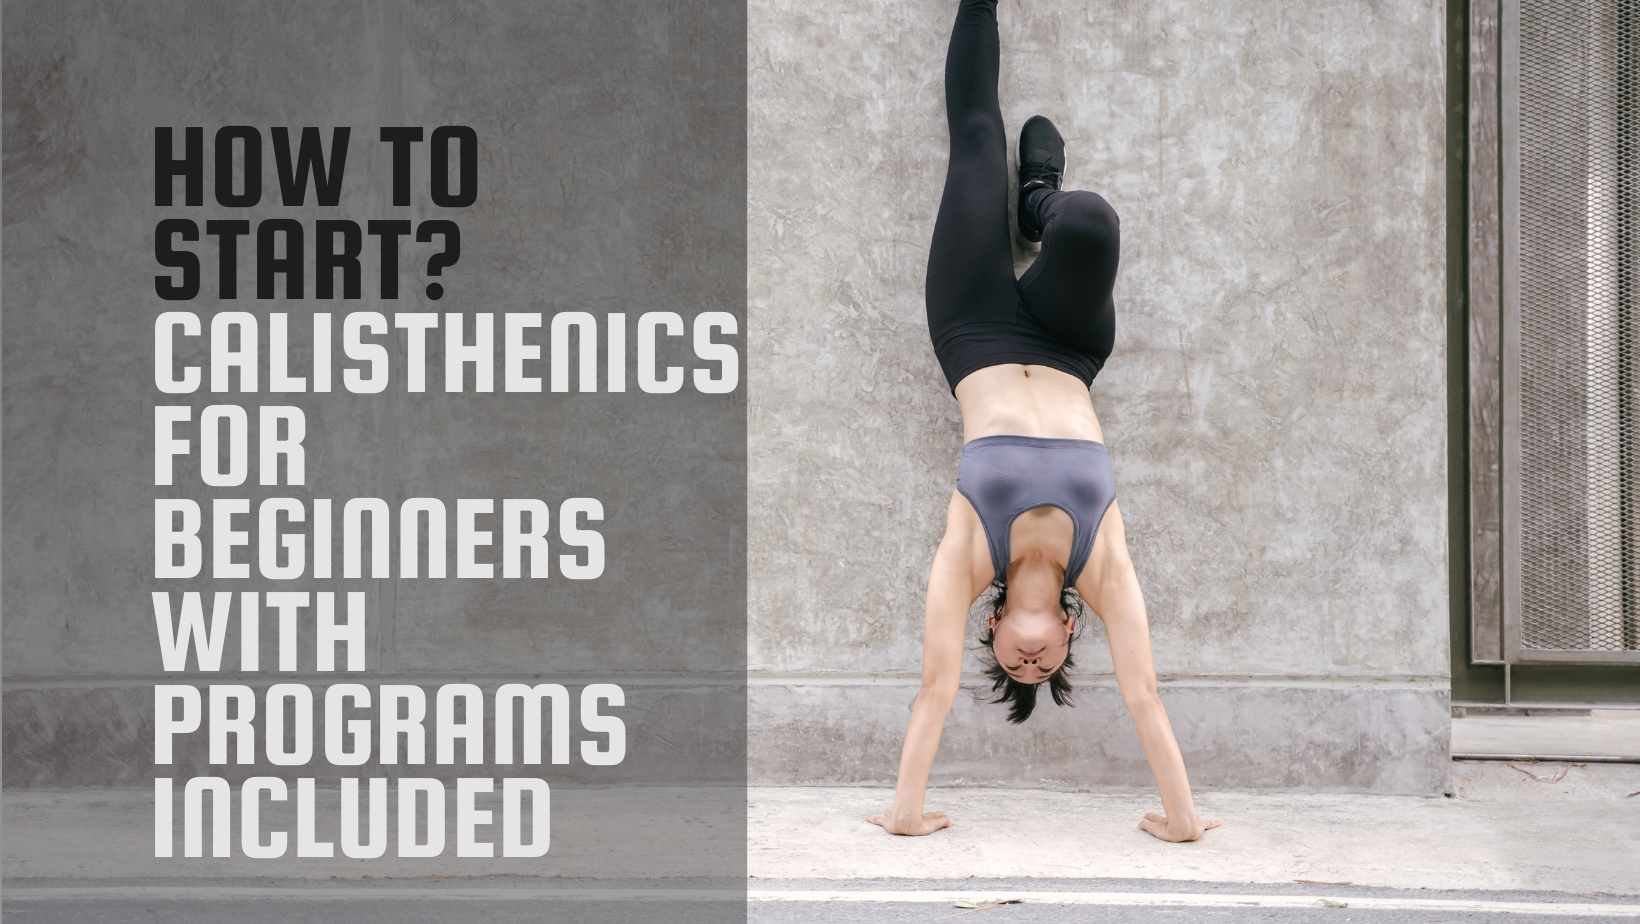 Handstands and calisthenics for beginners